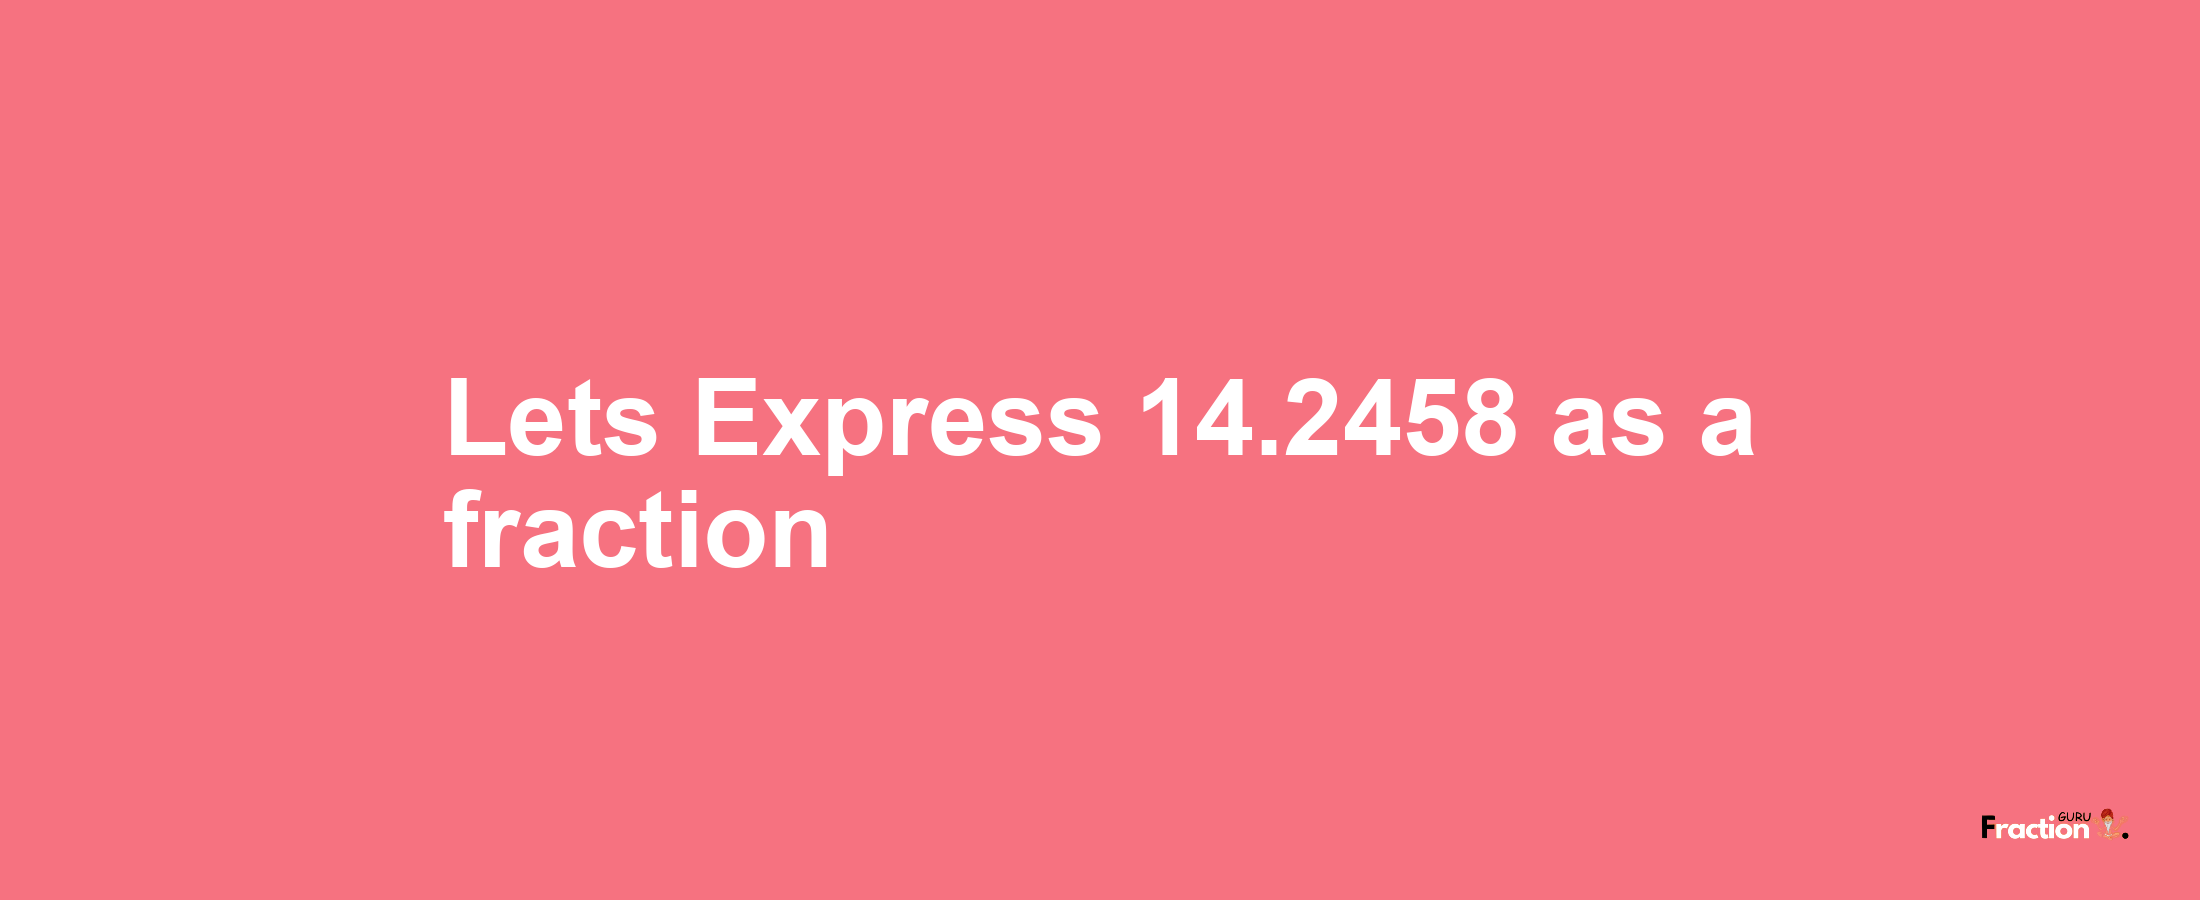 Lets Express 14.2458 as afraction